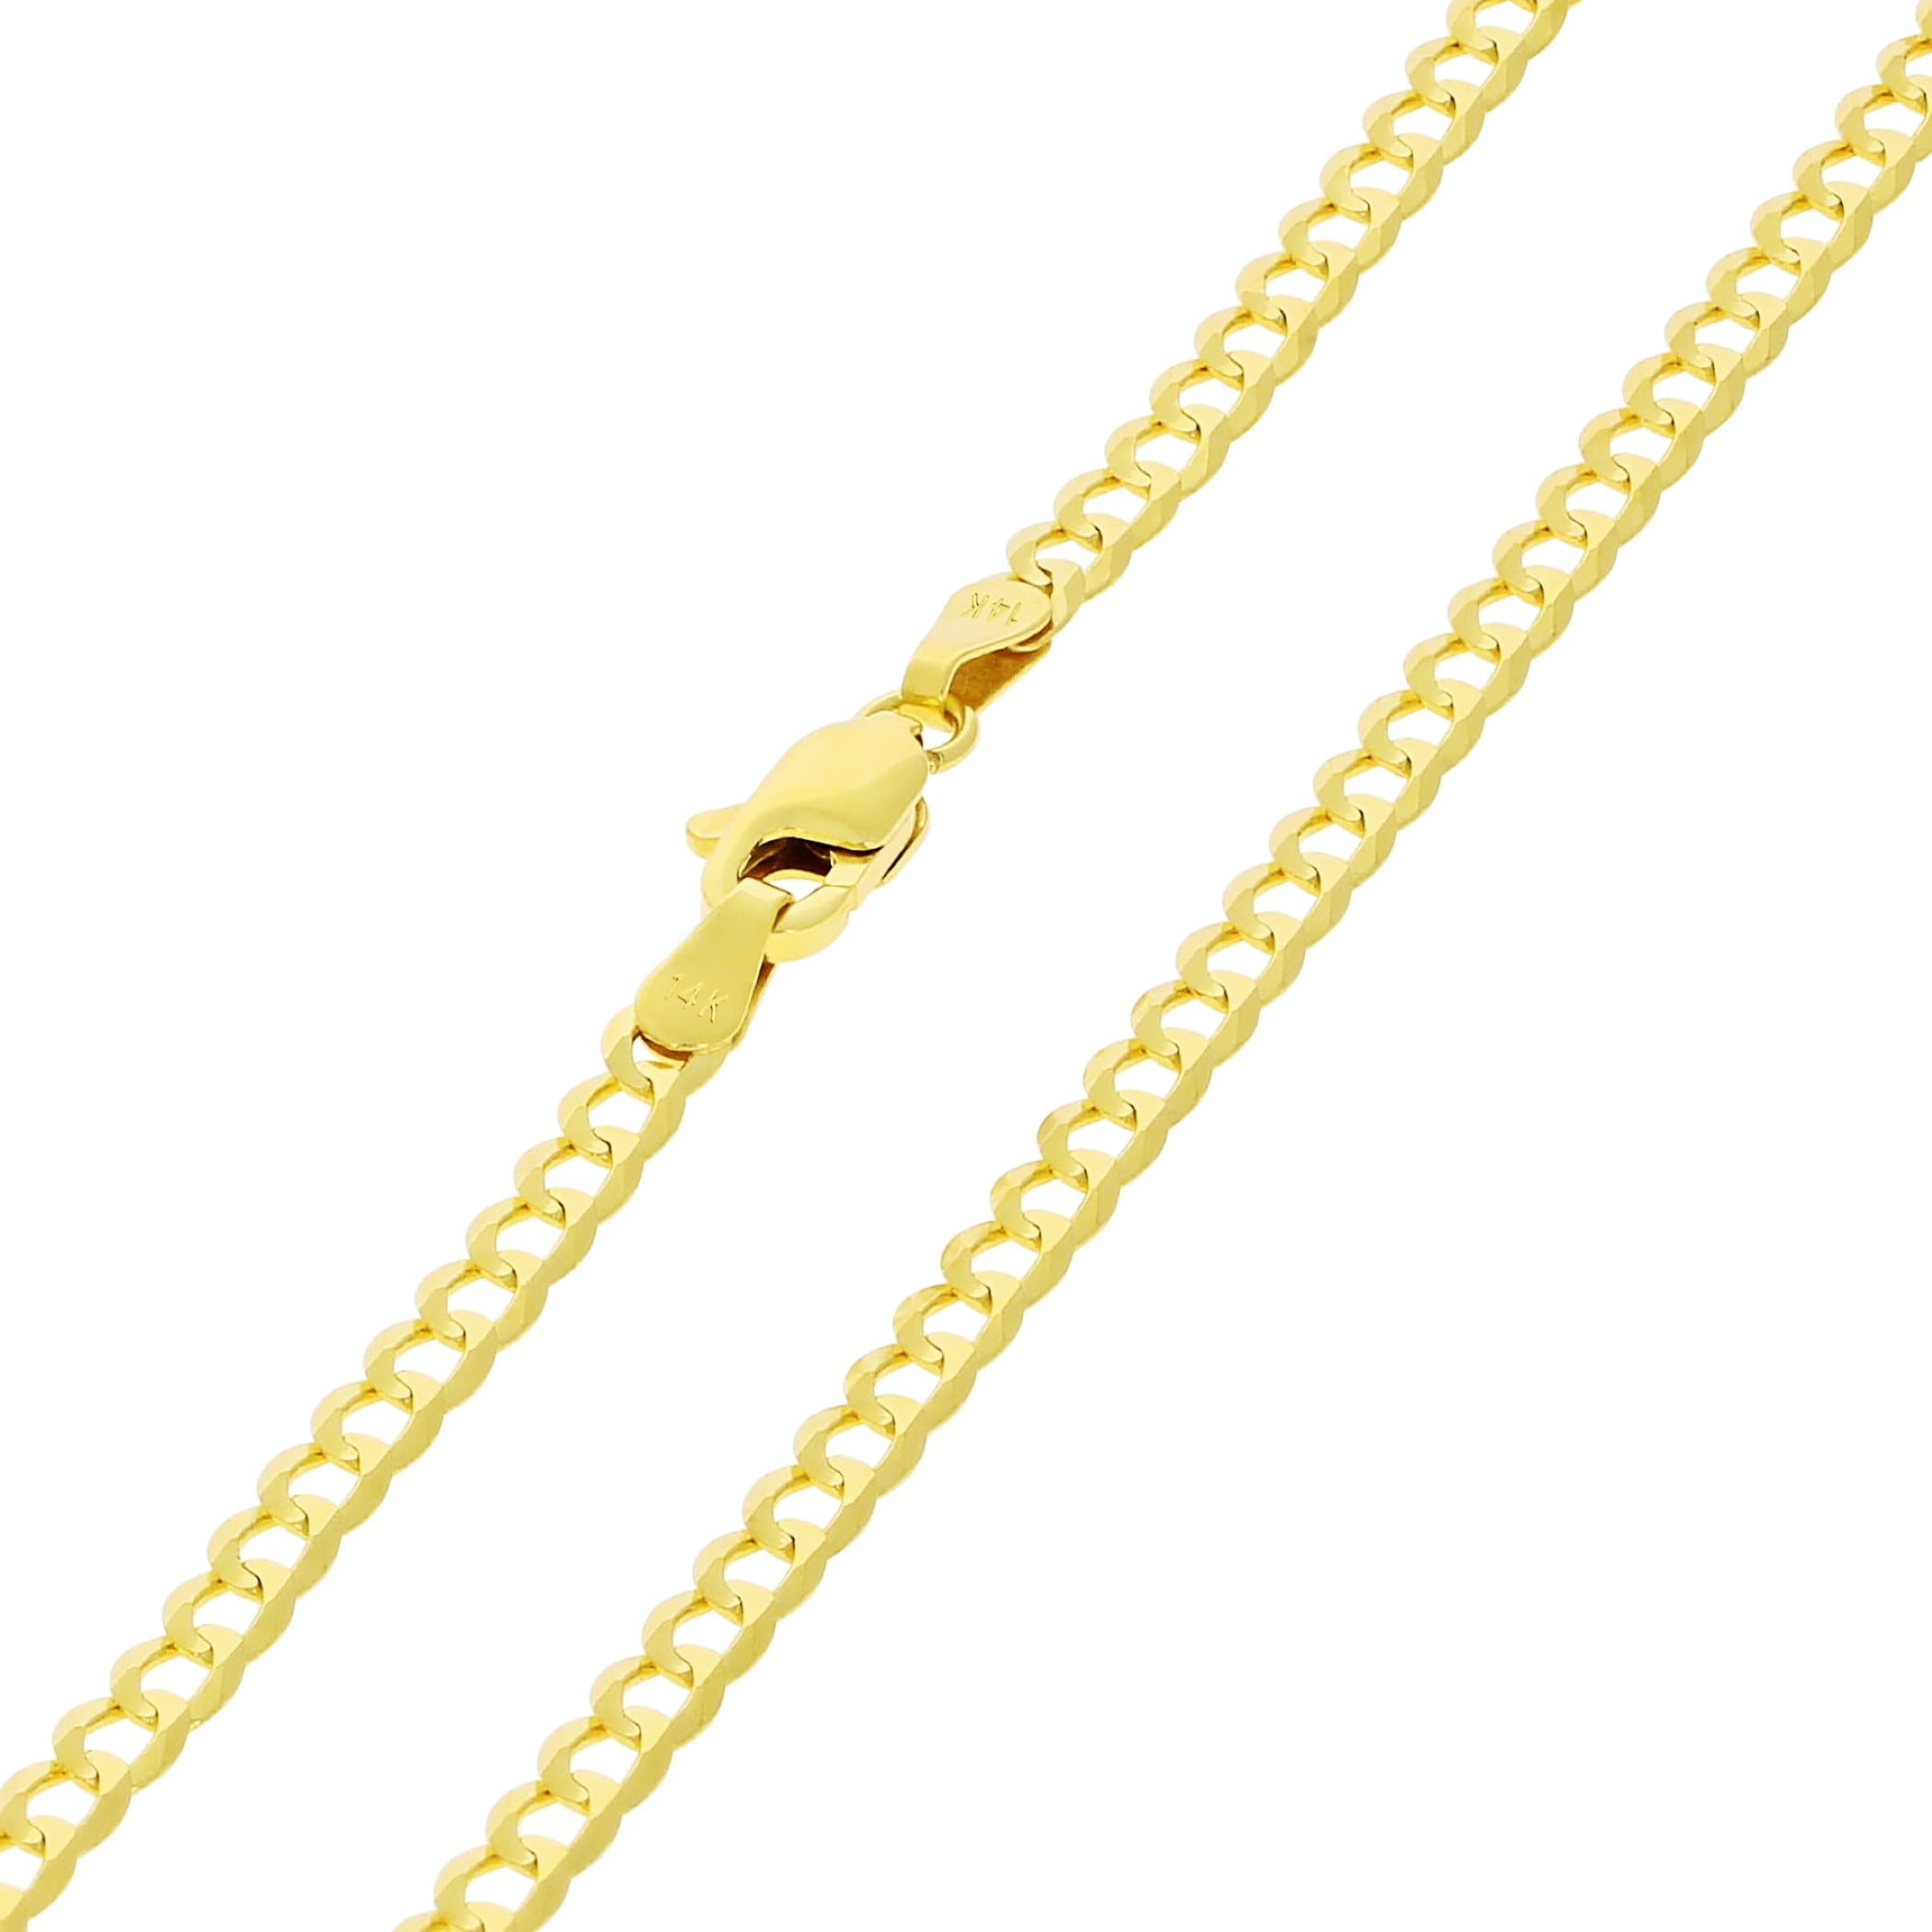 Necklaces Stainless Steel Gold Lobster Clasp Enc0001 7mm / 12mm Wholesale Jewelry Website Unisex